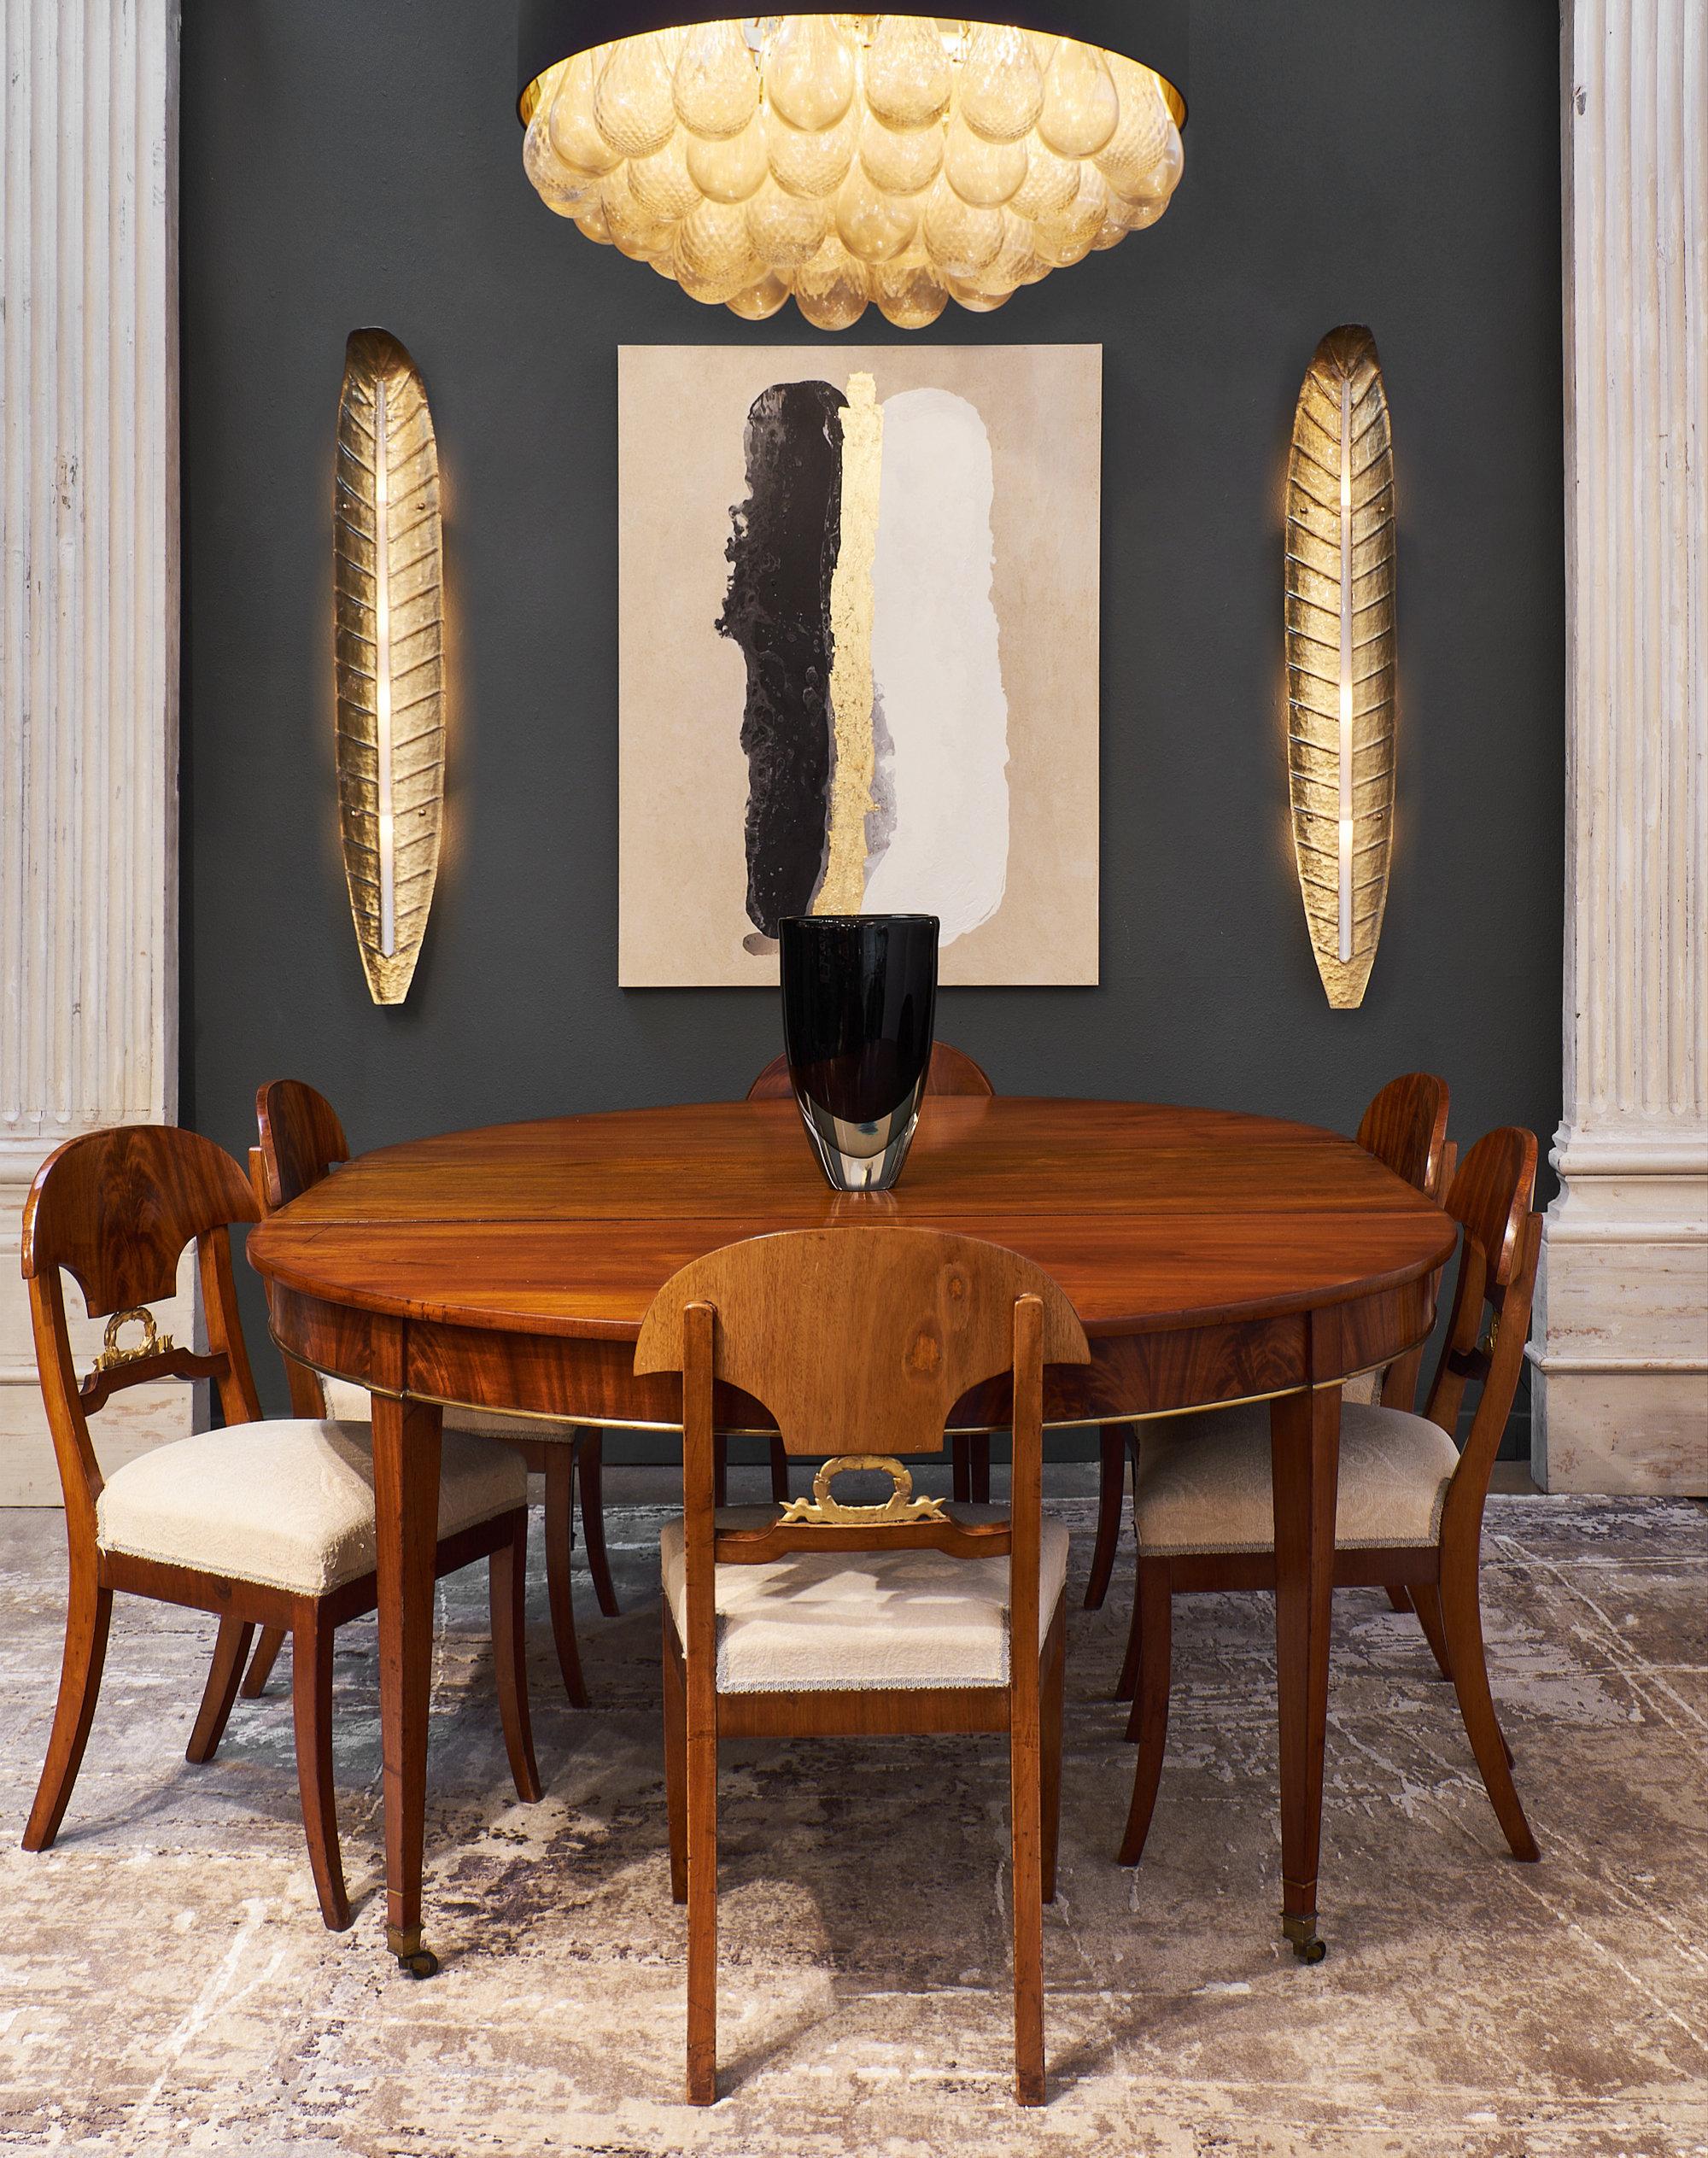 A superb Directoire flamed mahogany dining room table with two leaves. We love the brass trim and tapered legs on casters. Each leaf adds an additional 23.75” to the length of the table. The wood is a beautiful warm color, with fantastic antique